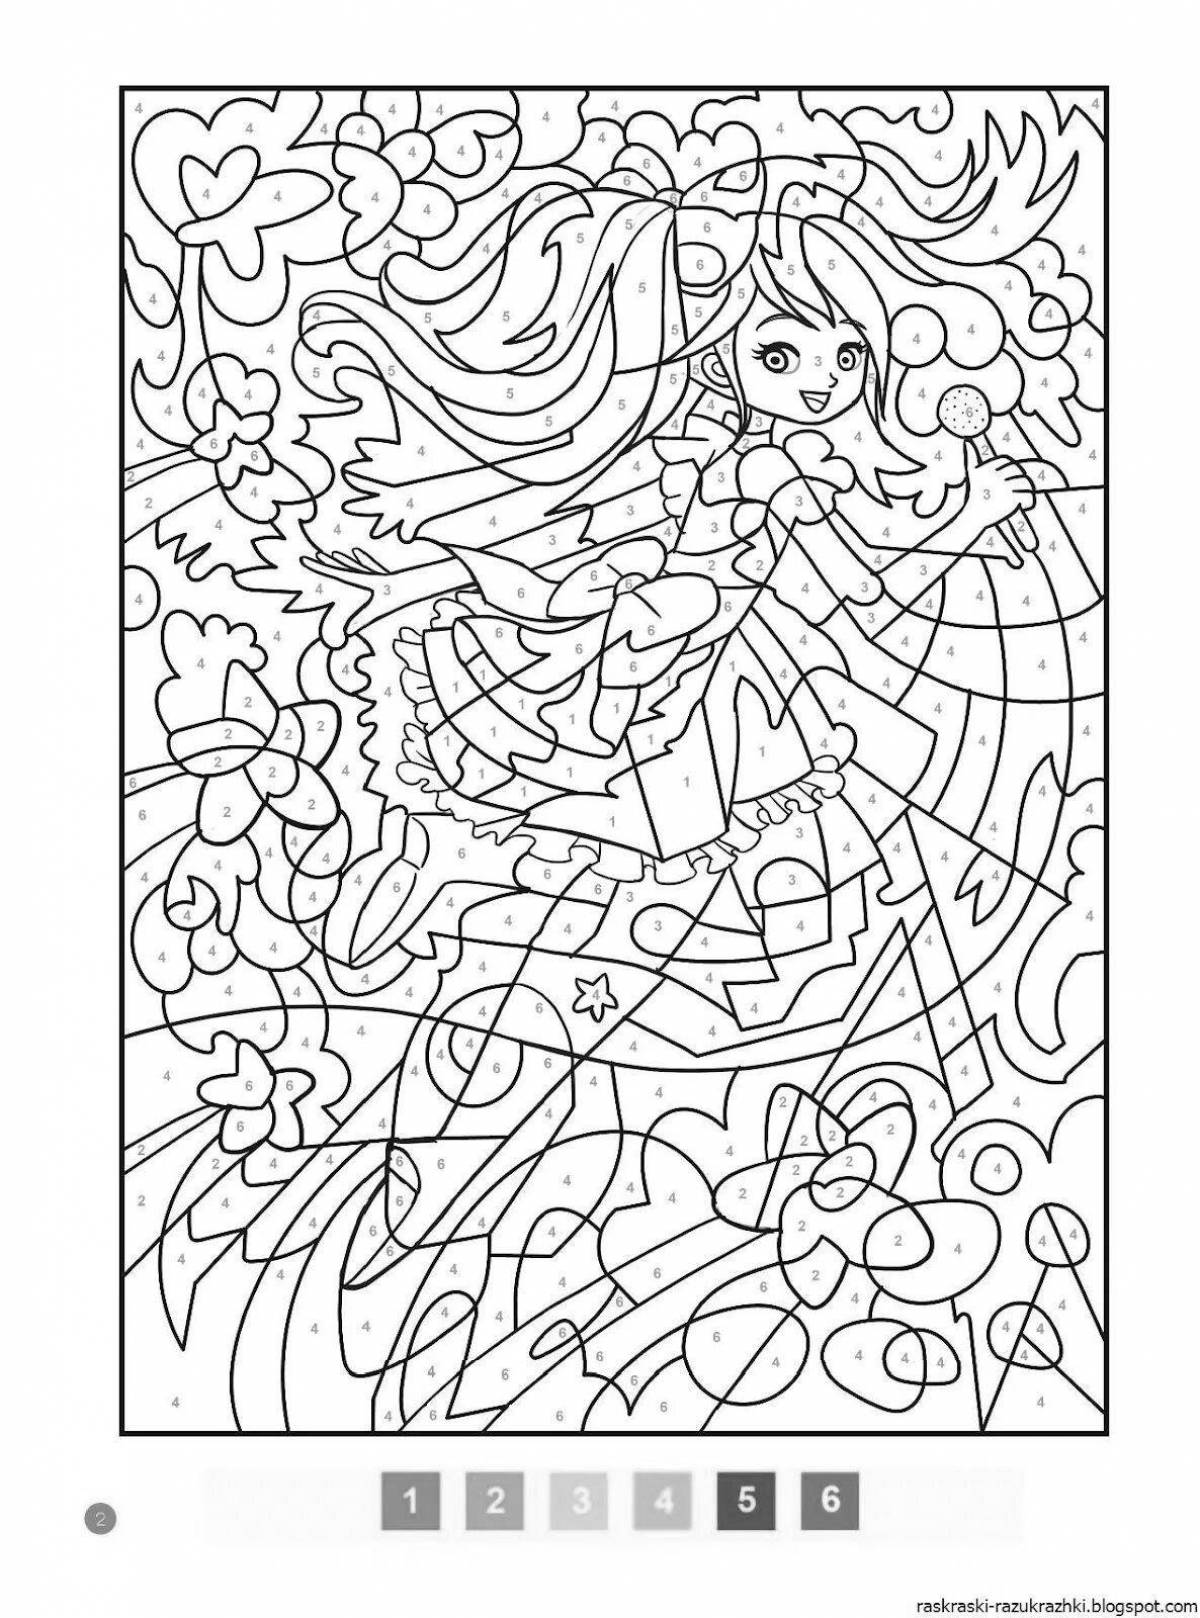 Charming coloring for girls 9-10 years old by numbers